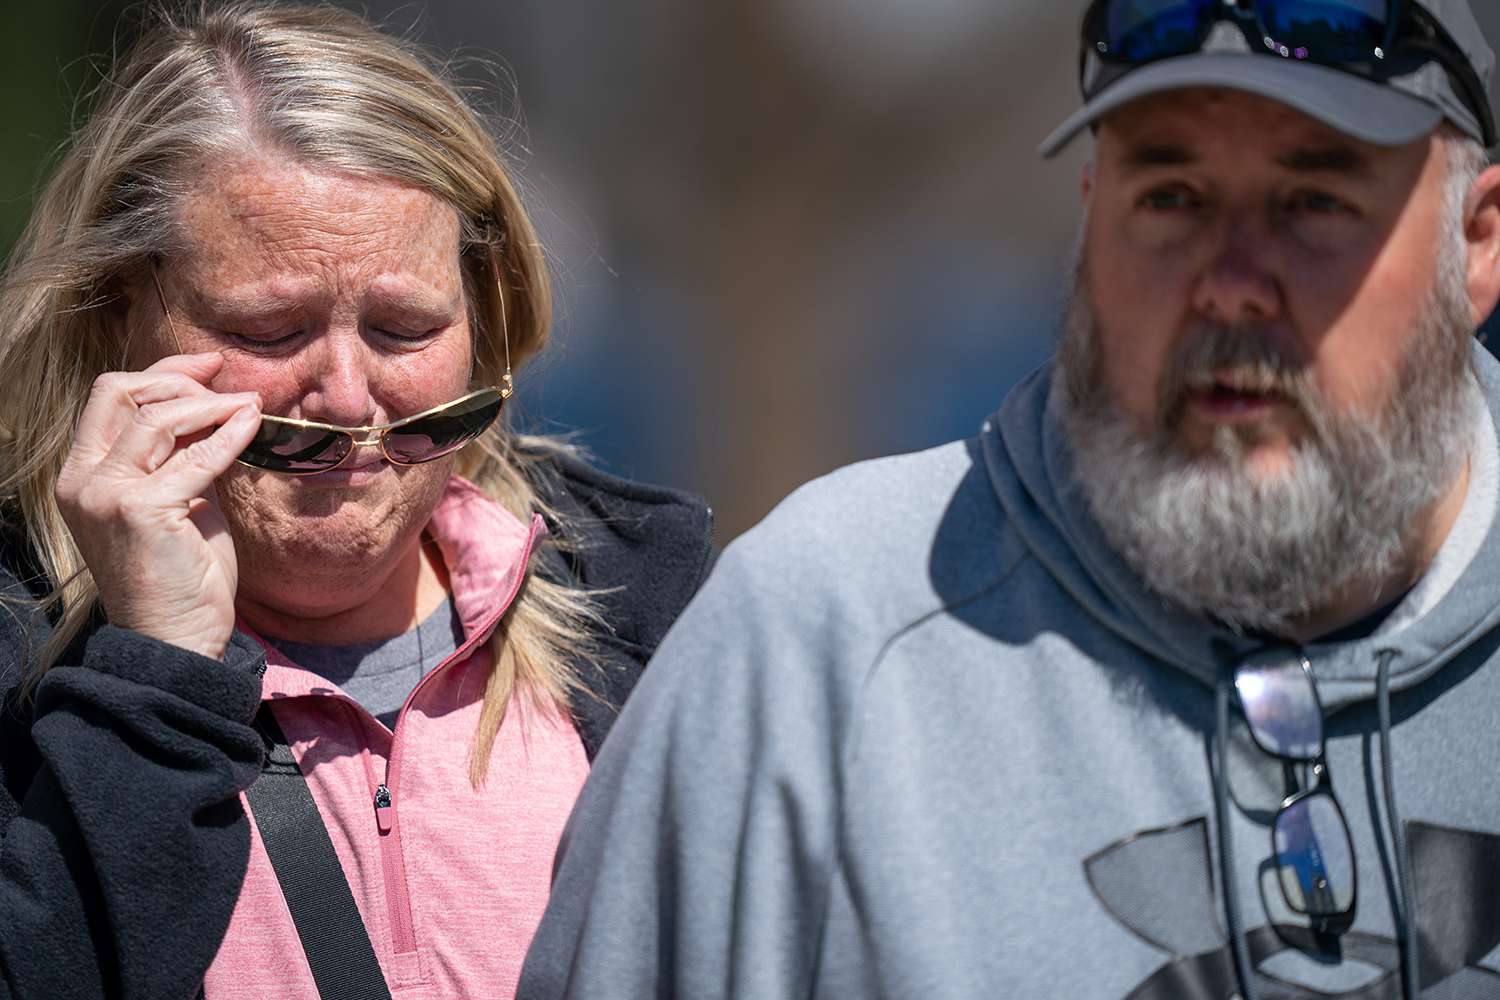 Michelle Strain Whiteid, left, and her husband, Chris Whiteid, speak to the media during a press conference to update the public about the disappearance of University of Missouri student Riley Strain at Public Square Park in Nashville